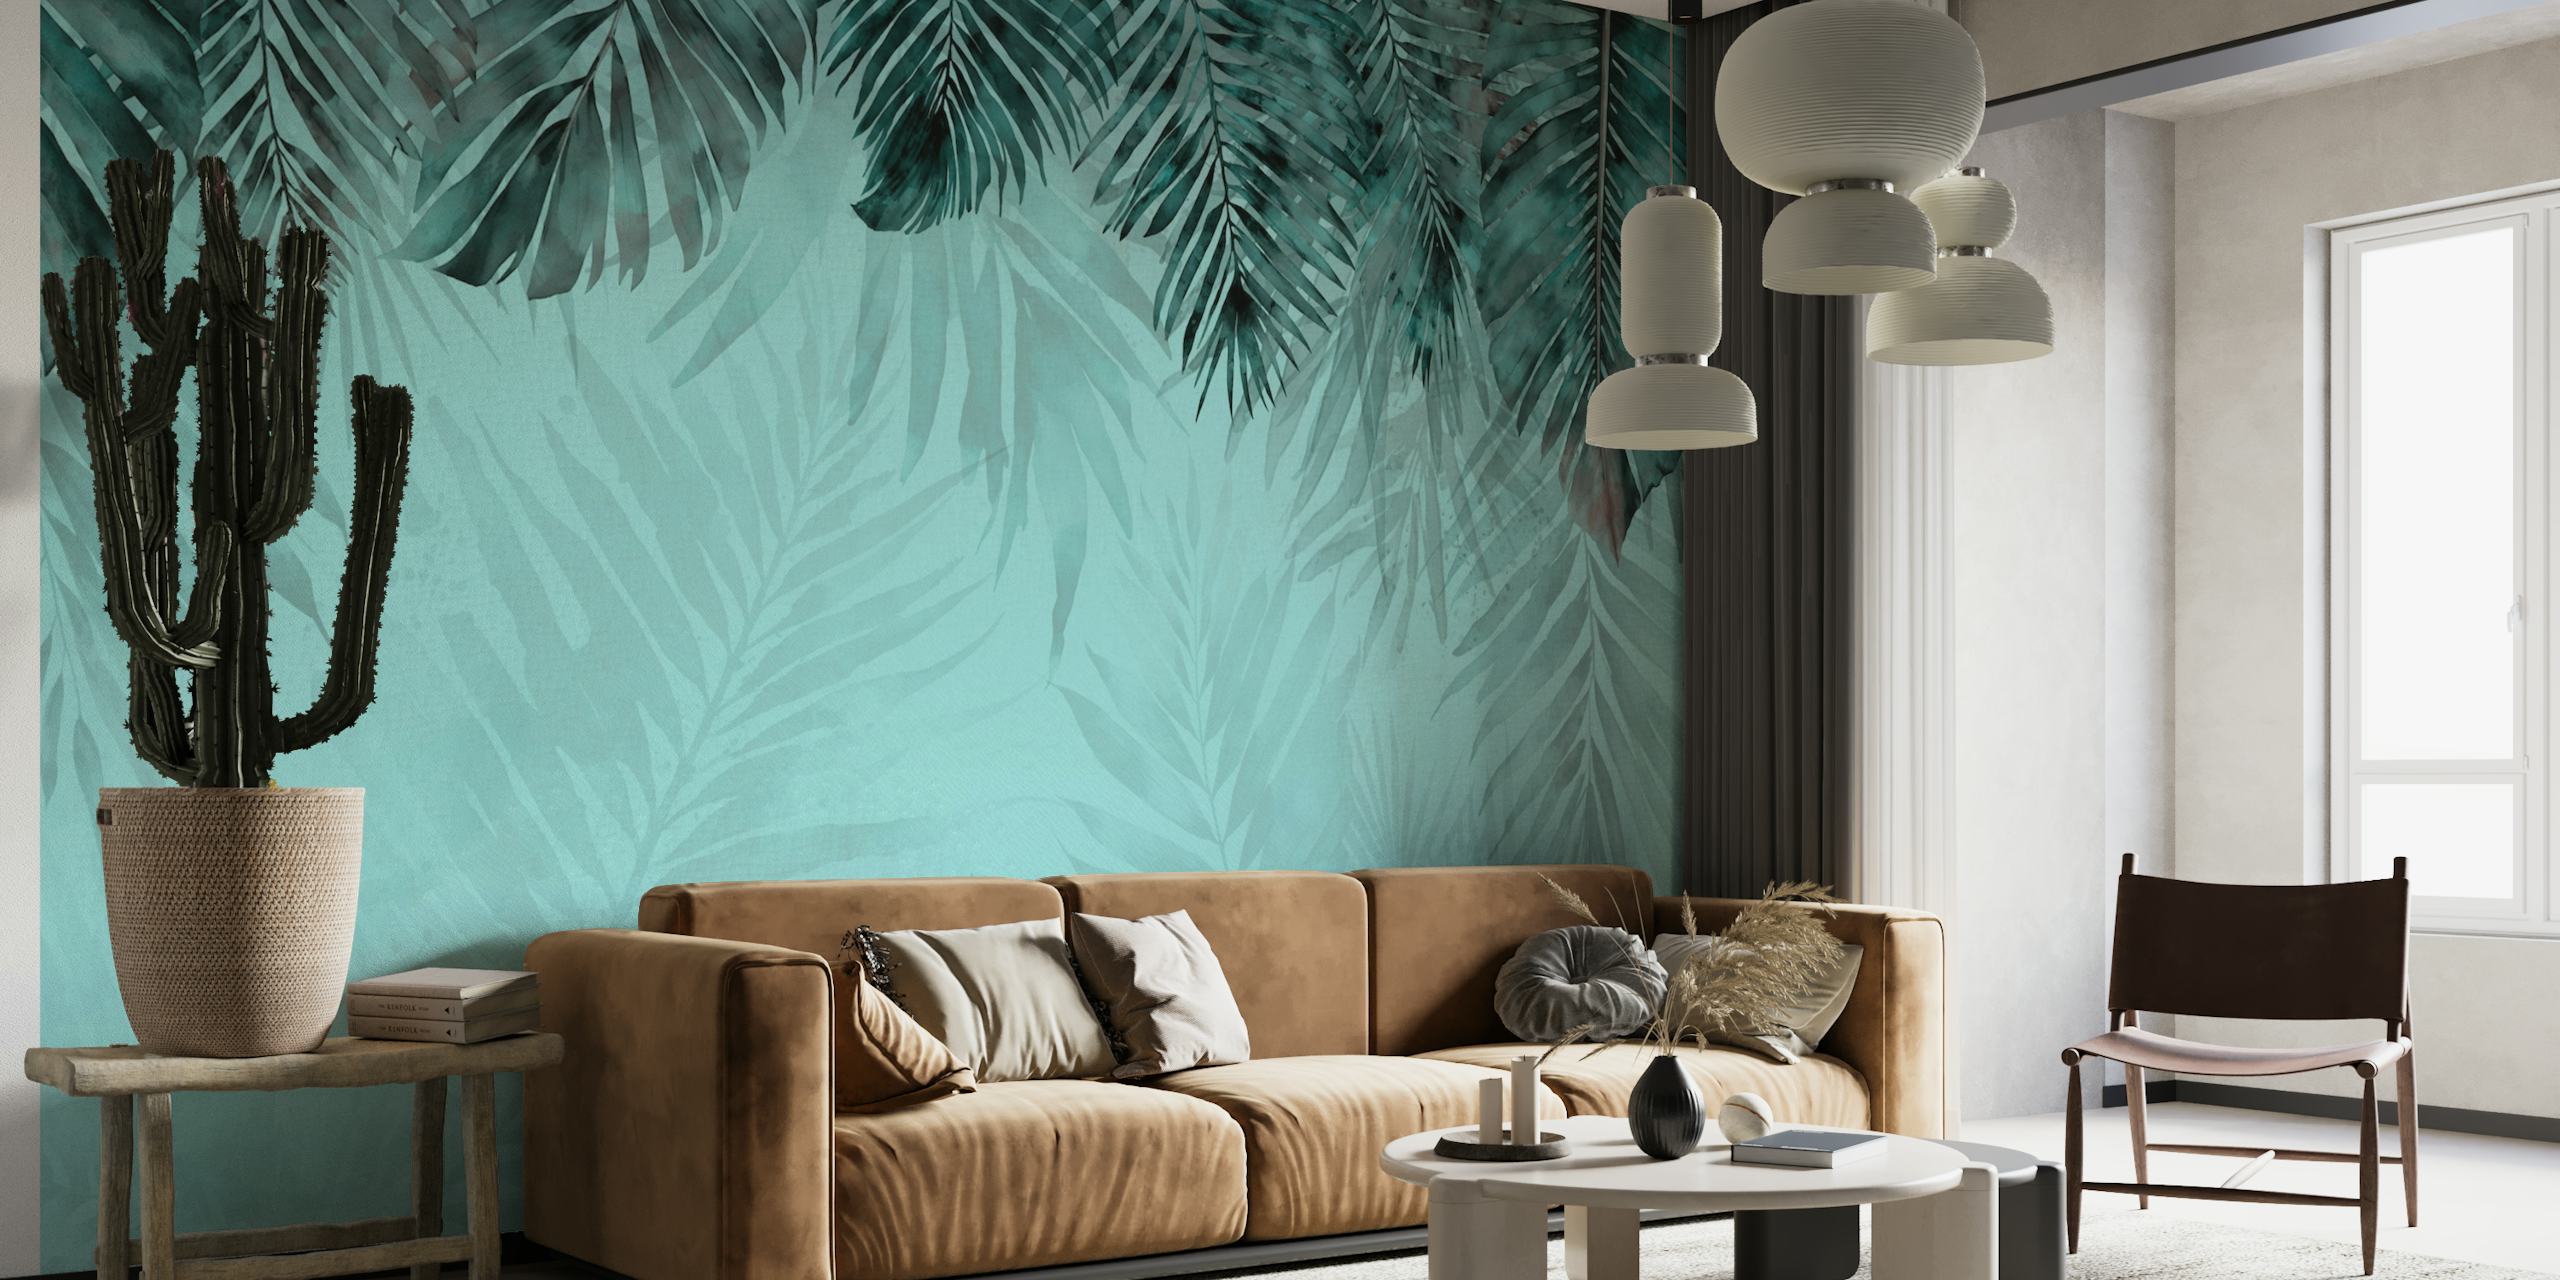 Turquoise and teal jungle-themed wall mural with tropical foliage patterns